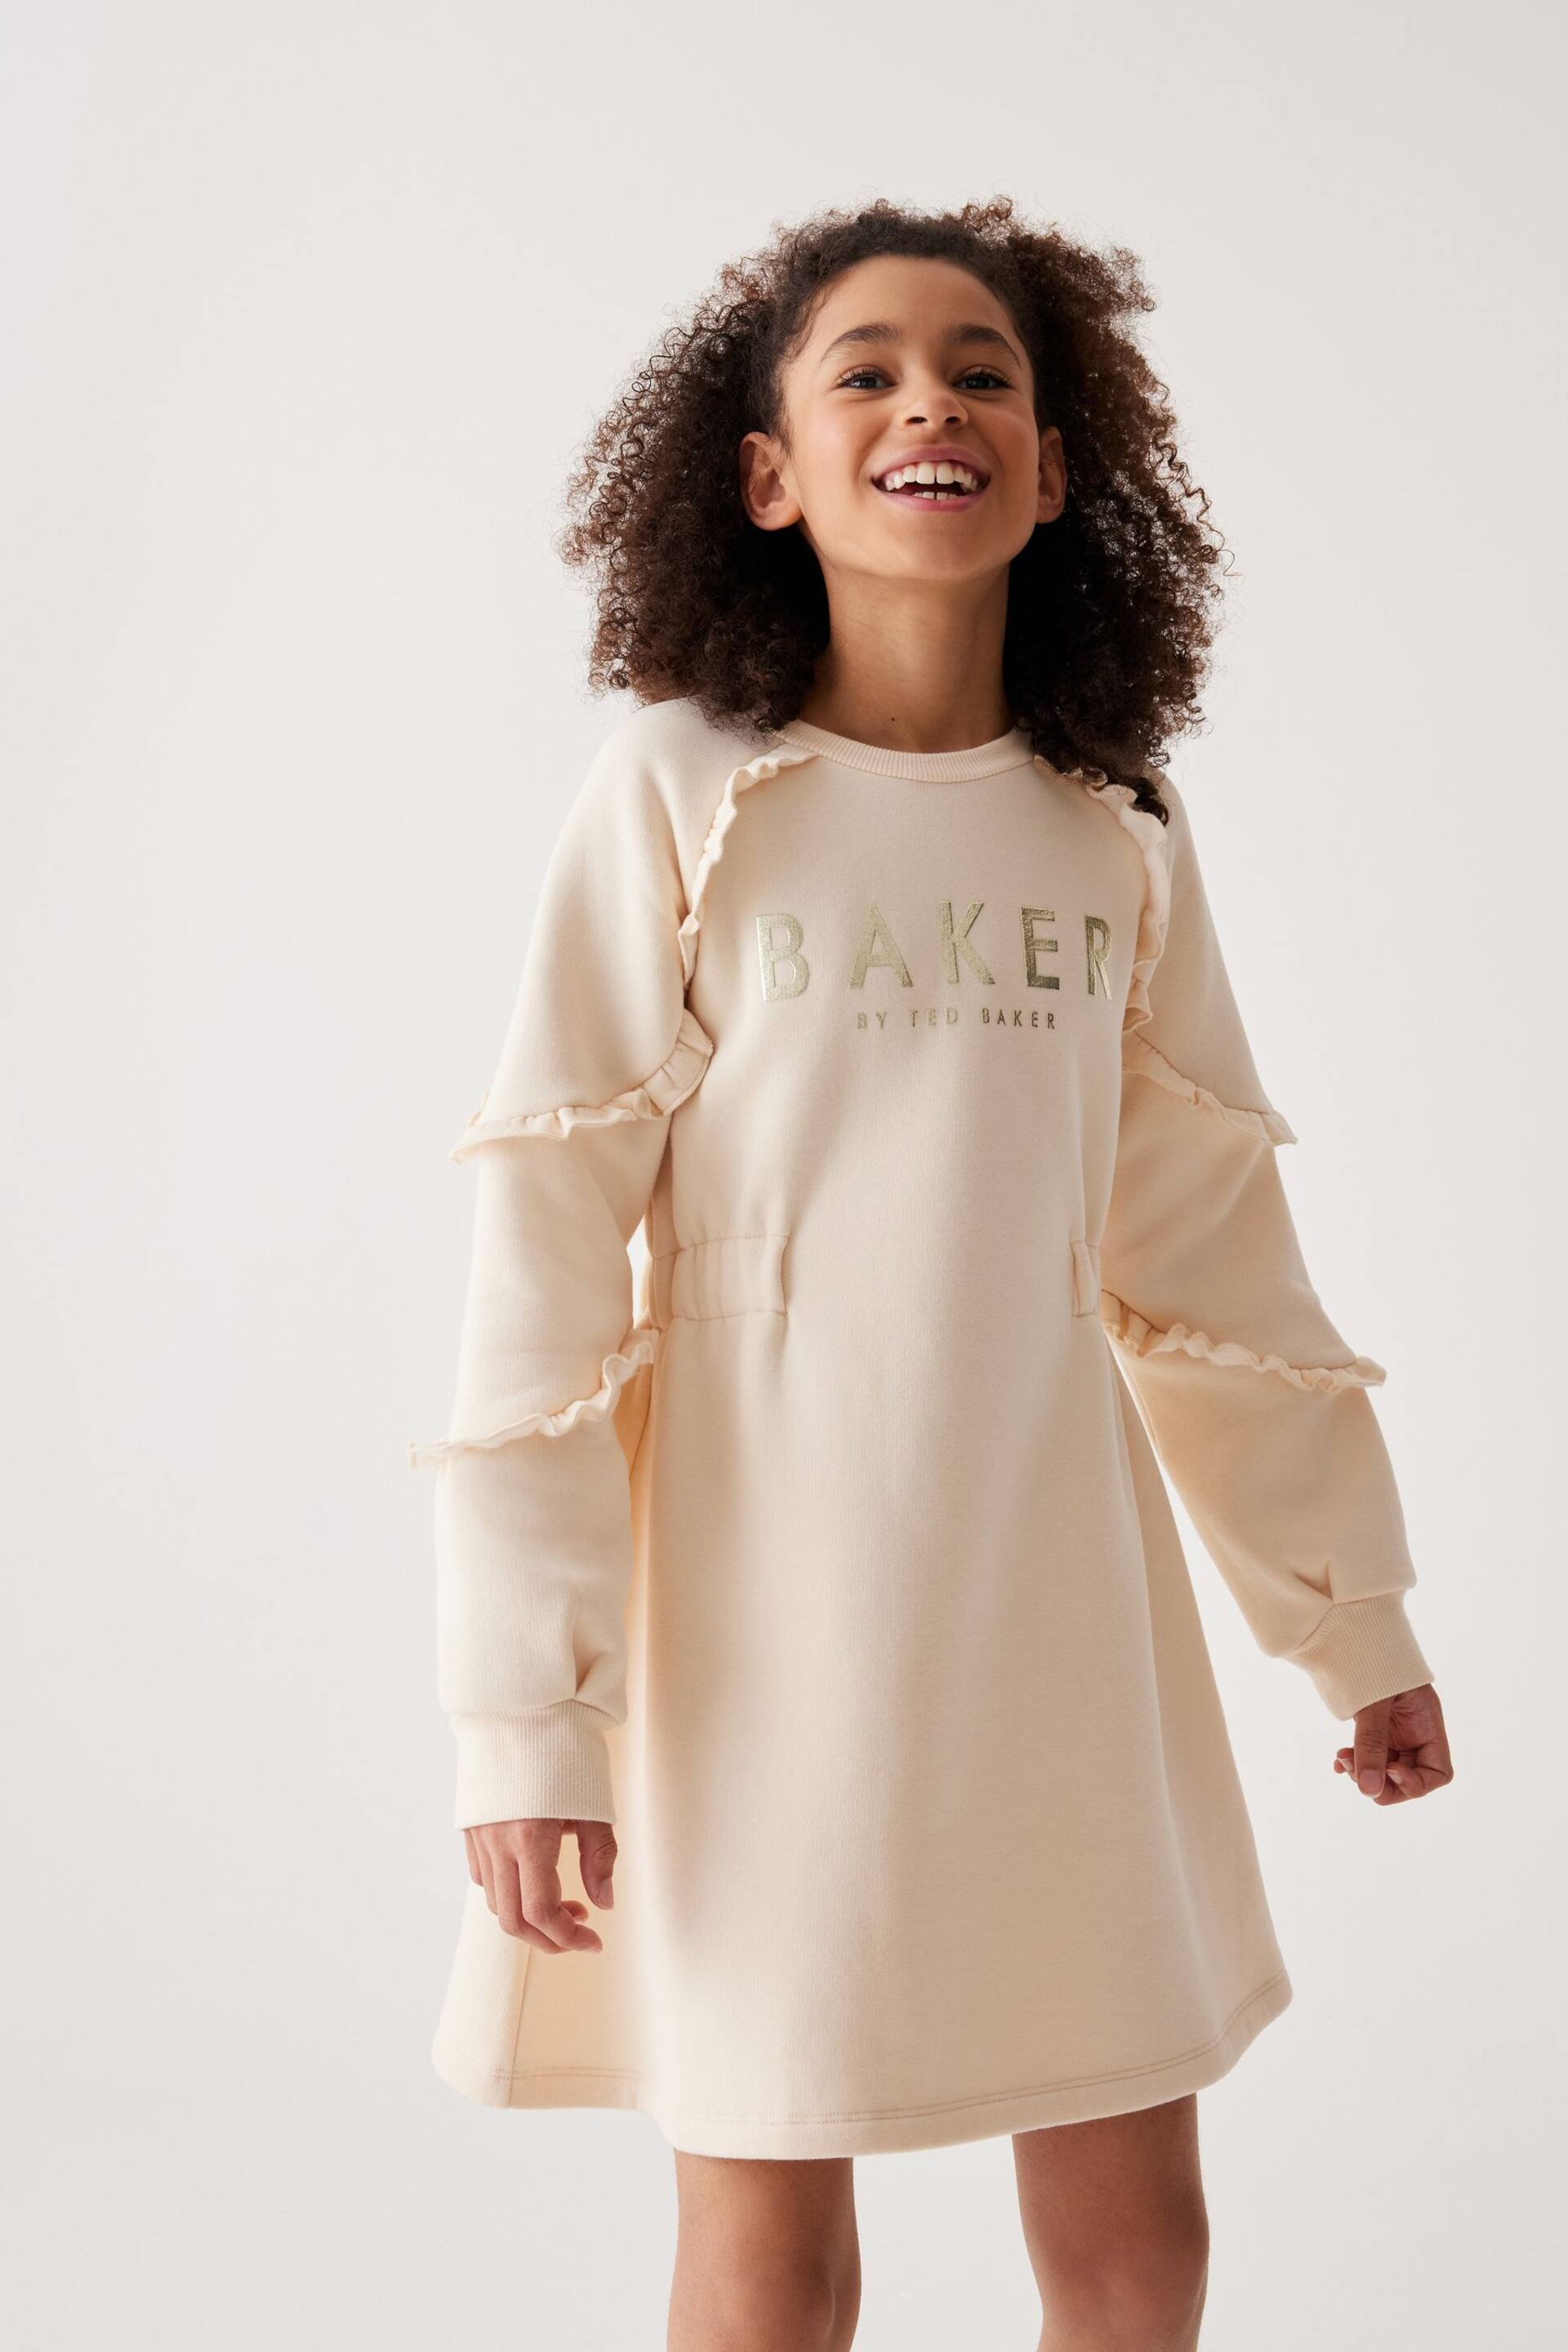 Baker by Ted Baker Frilled Sweat Dress - Image 1 of 9